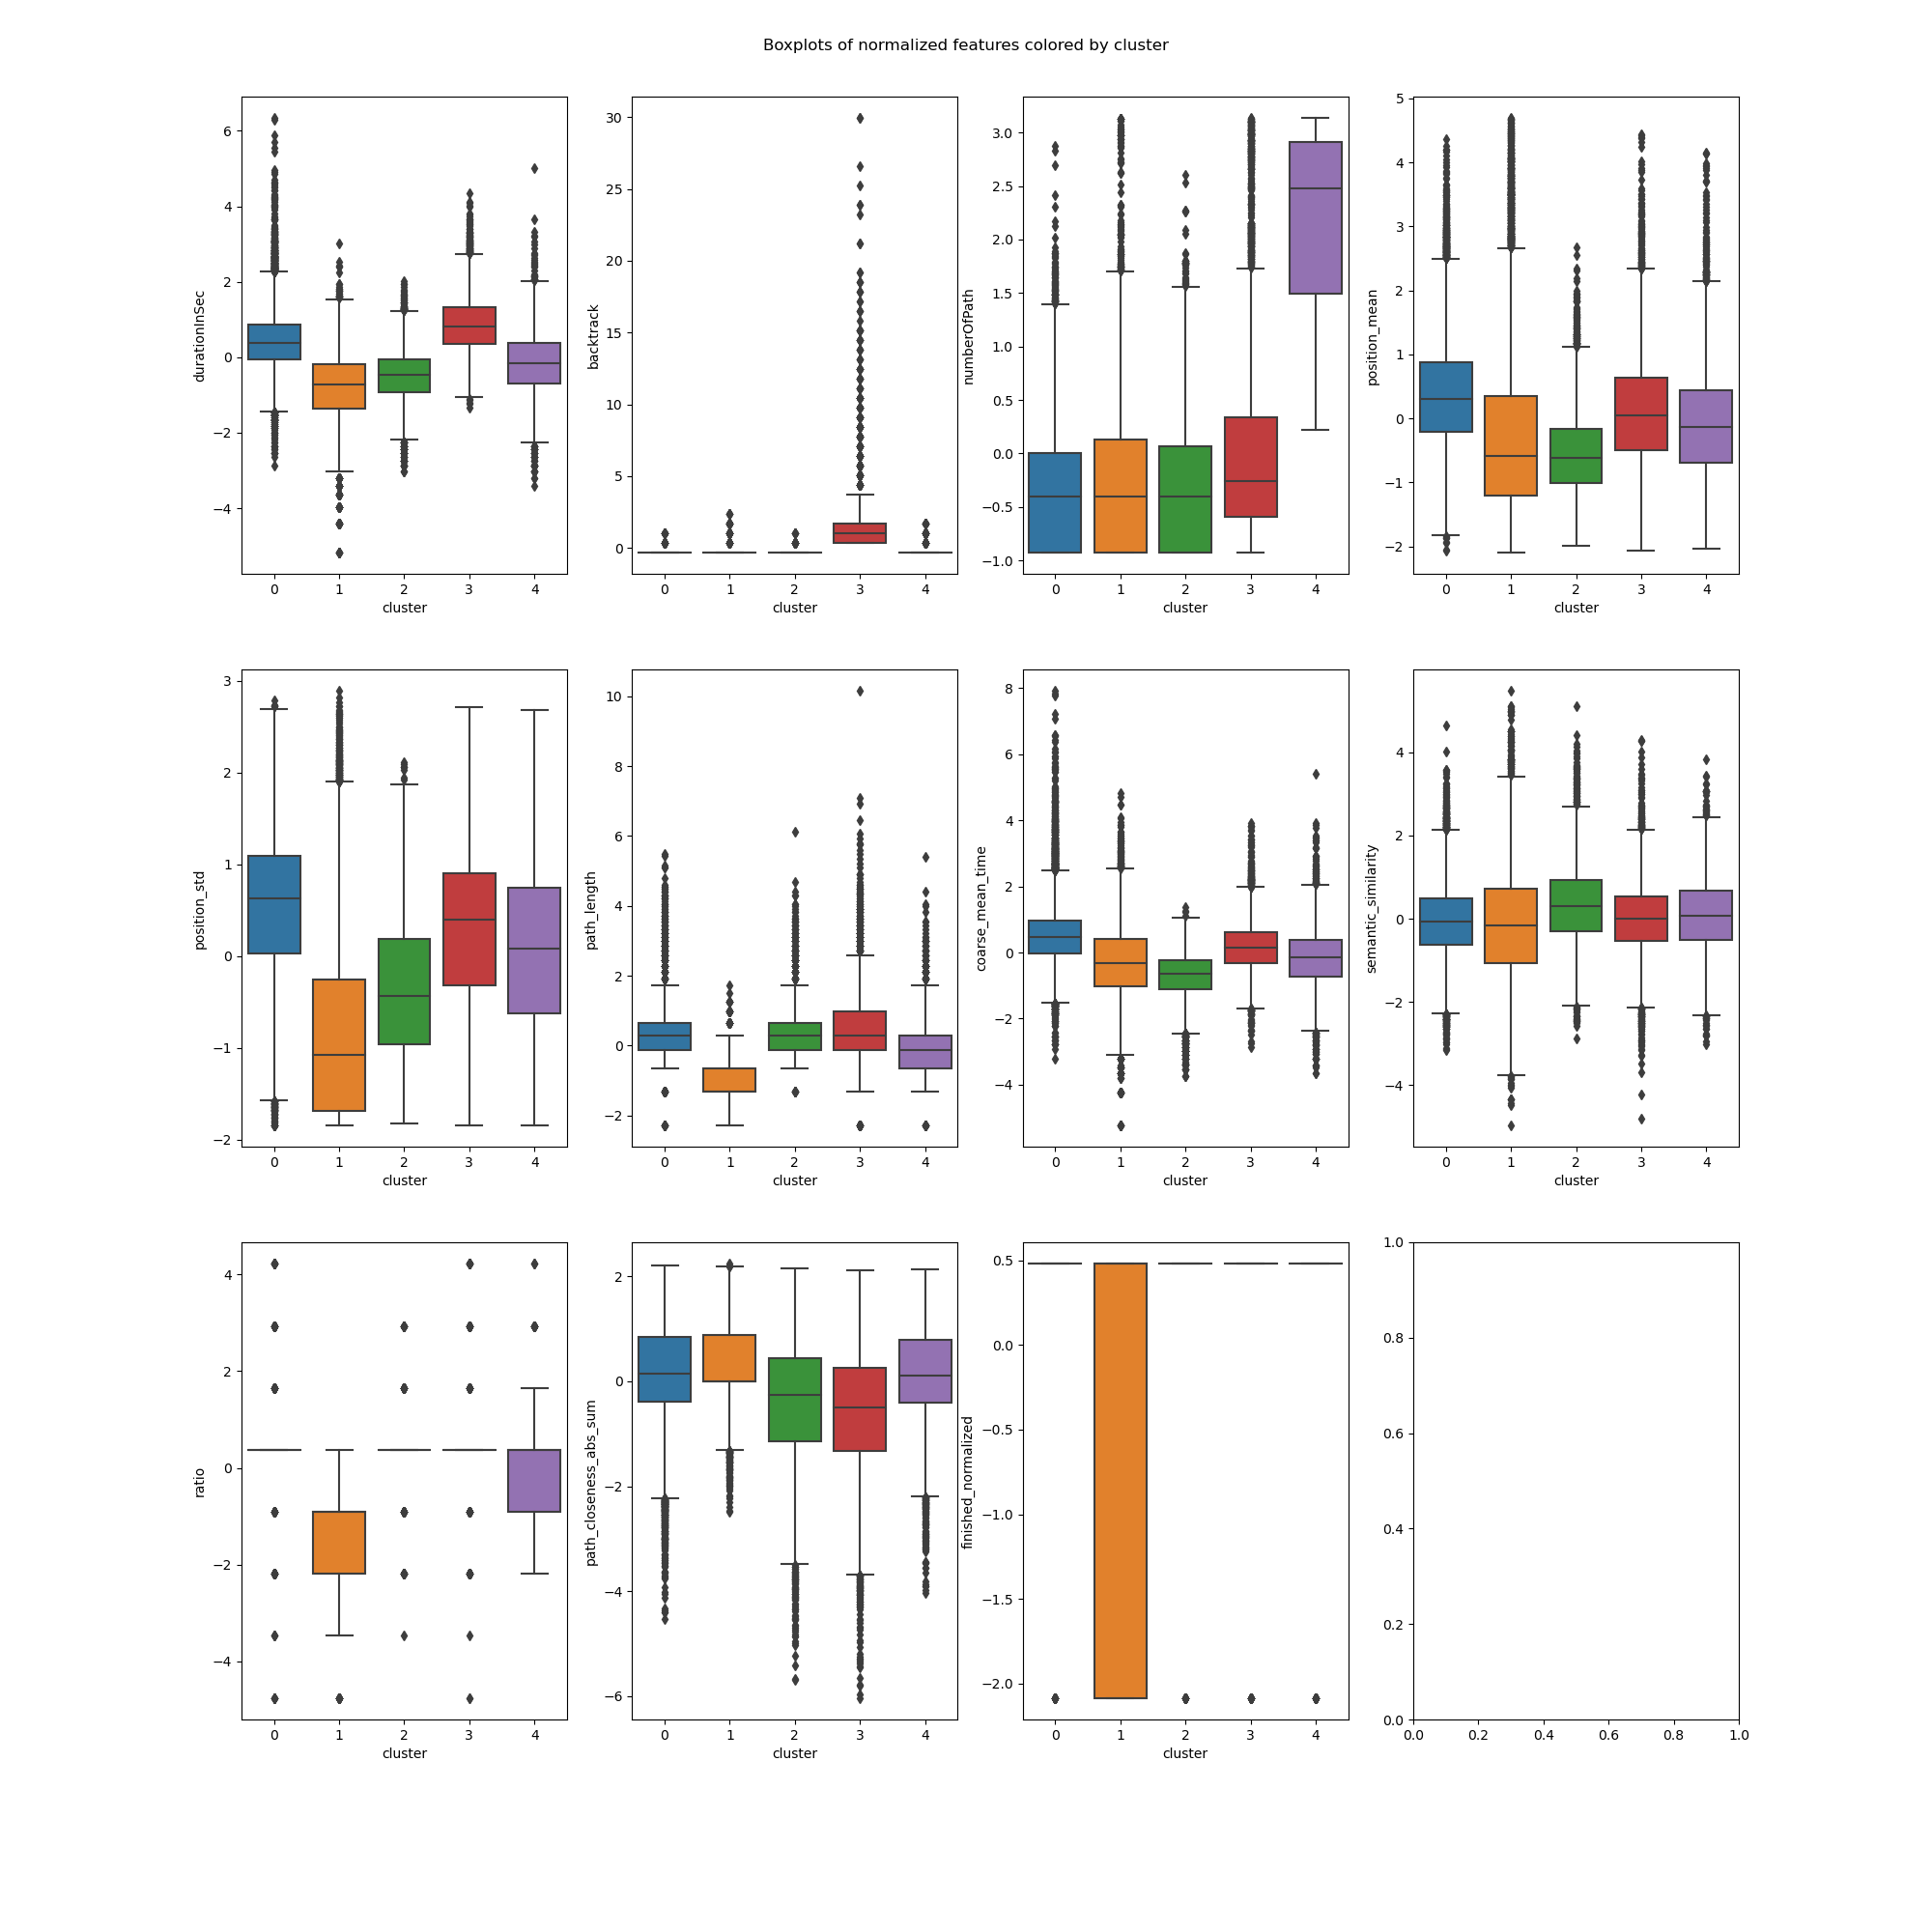 boxplot_features_colored_by_cluster